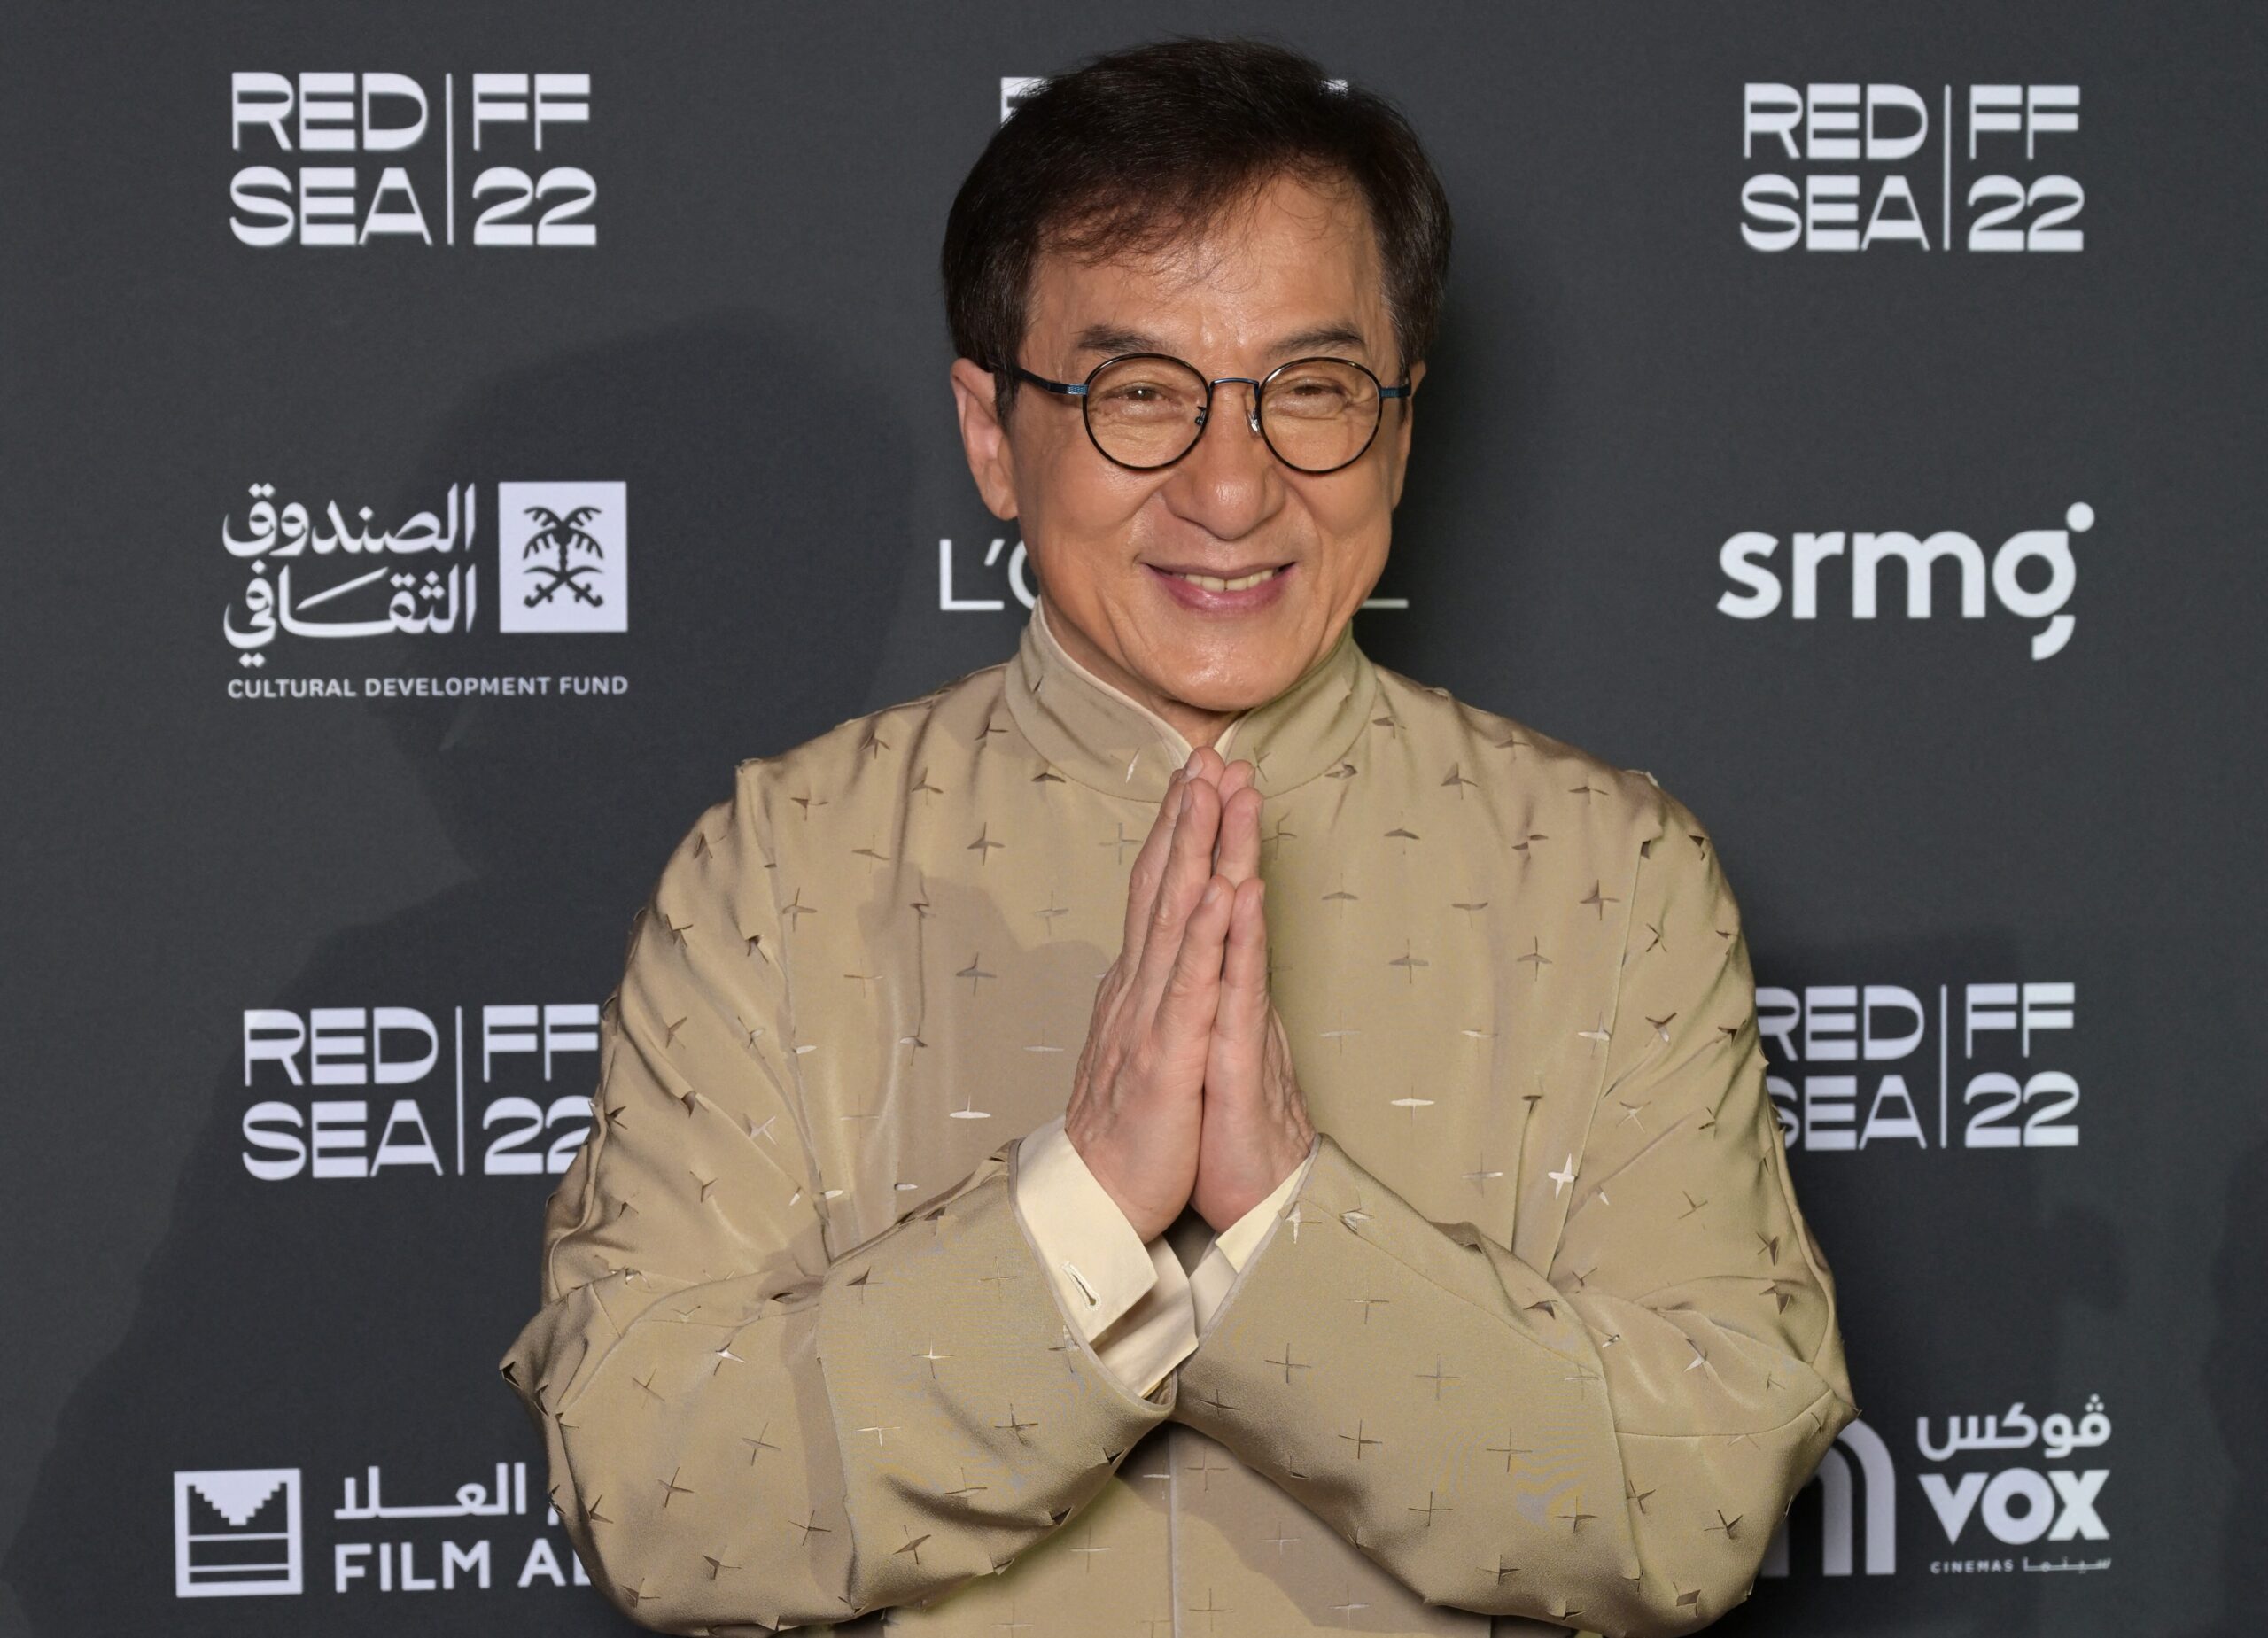 Actor Jackie Chan poses on the Red Carpet during the closing ceremony of the second edition of the Red Sea International Film Festival (RSIFF), in Jeddah, Saudi Arabia, on December 8, 2022.,Image: 743418006, License: Rights-managed, Restrictions: , Model Release: no, Credit line: Balkis Press/ABACA / Abaca Press / Profimedia